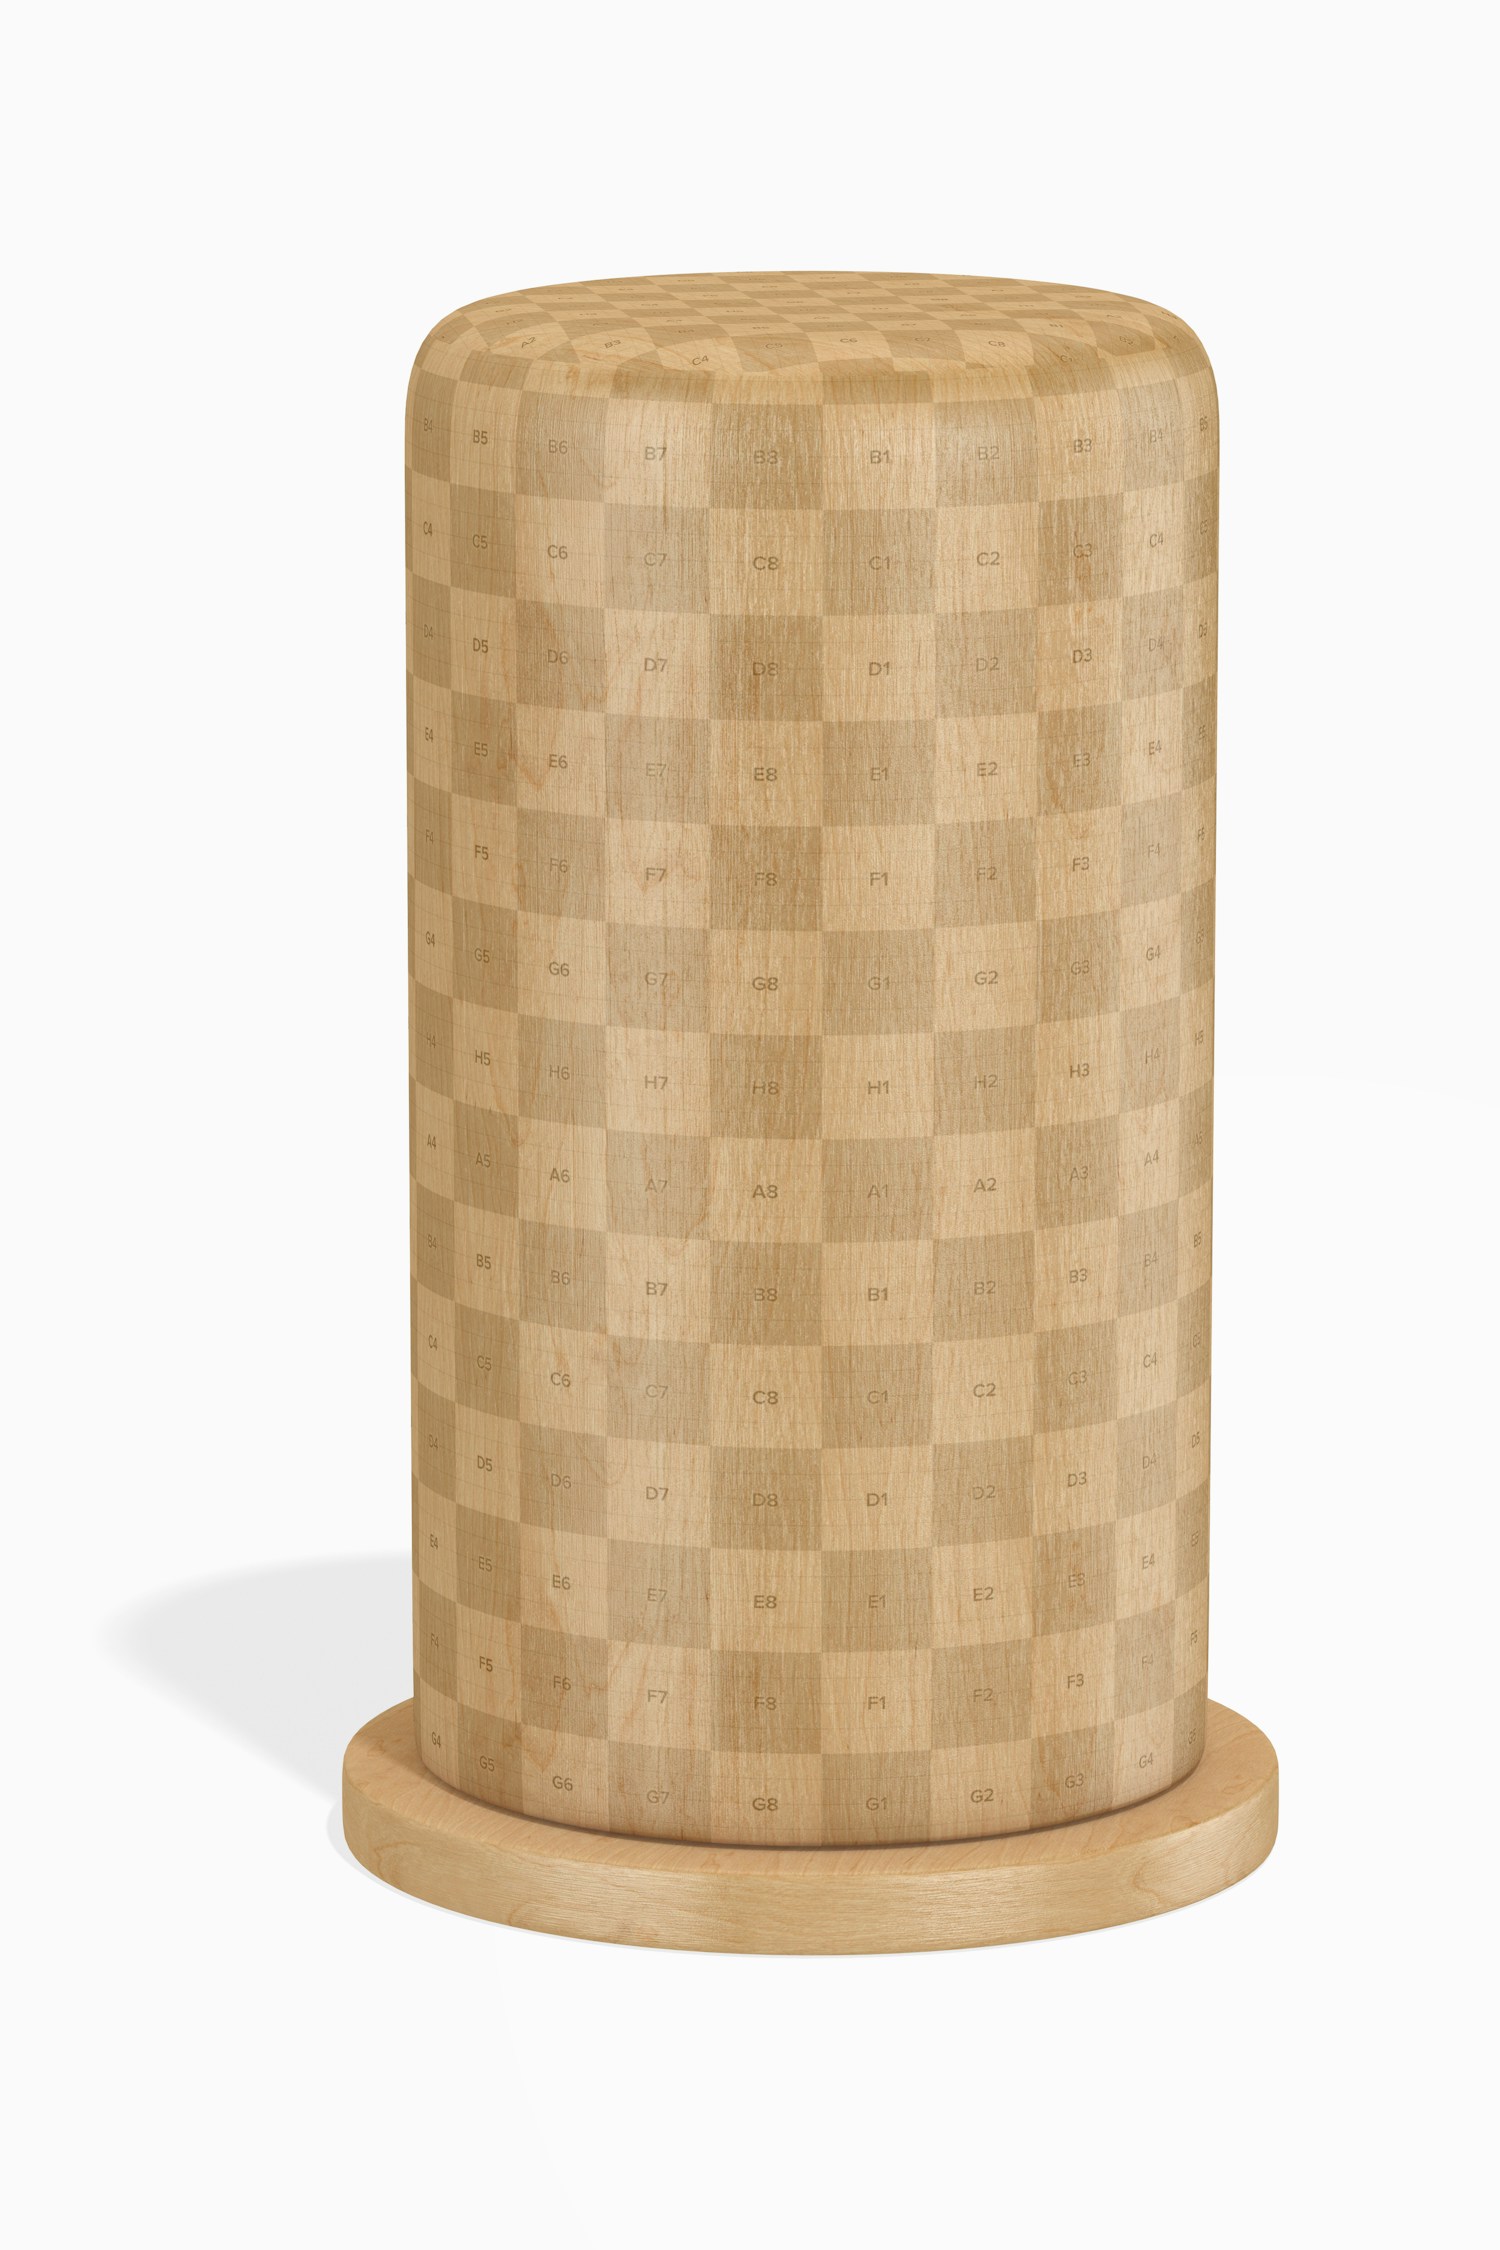 Wooden Toothpick Dispenser Mockup, Front View